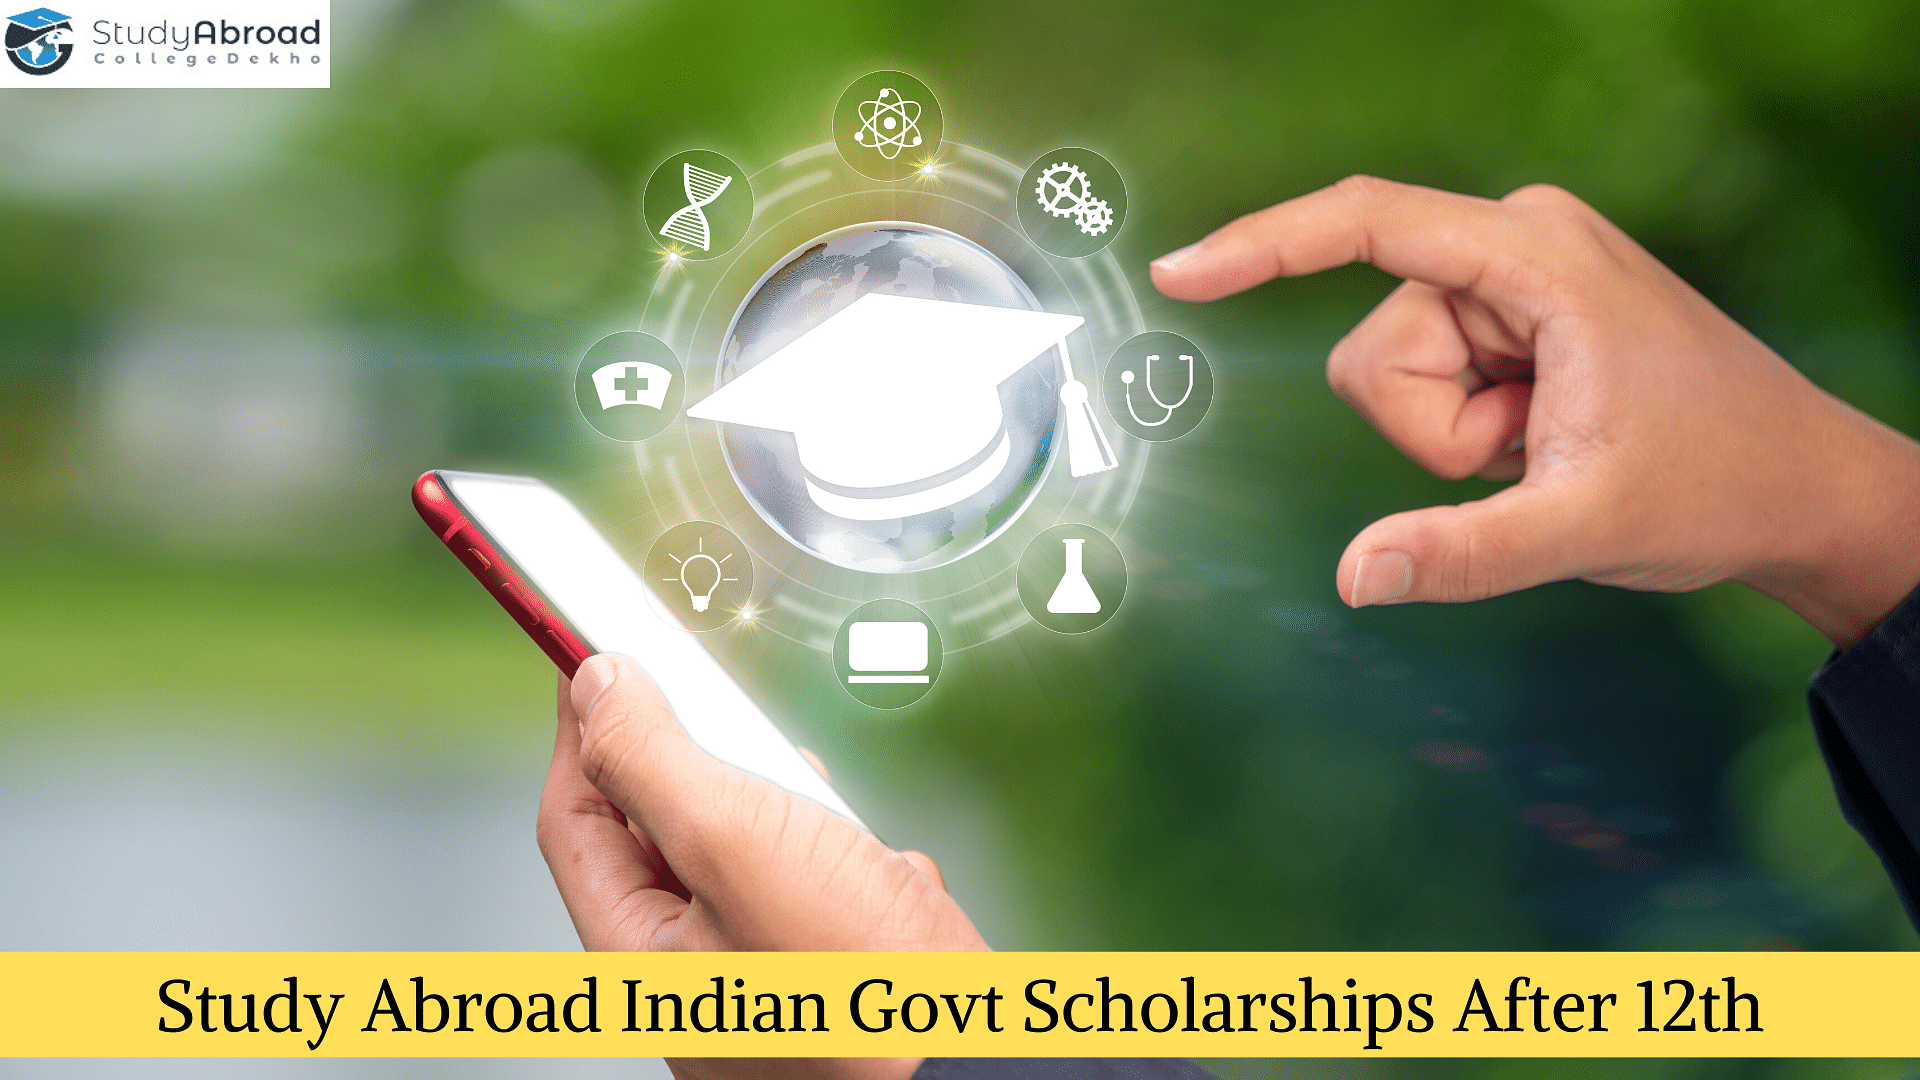 Study Abroad Indian Govt Scholarships After 12th